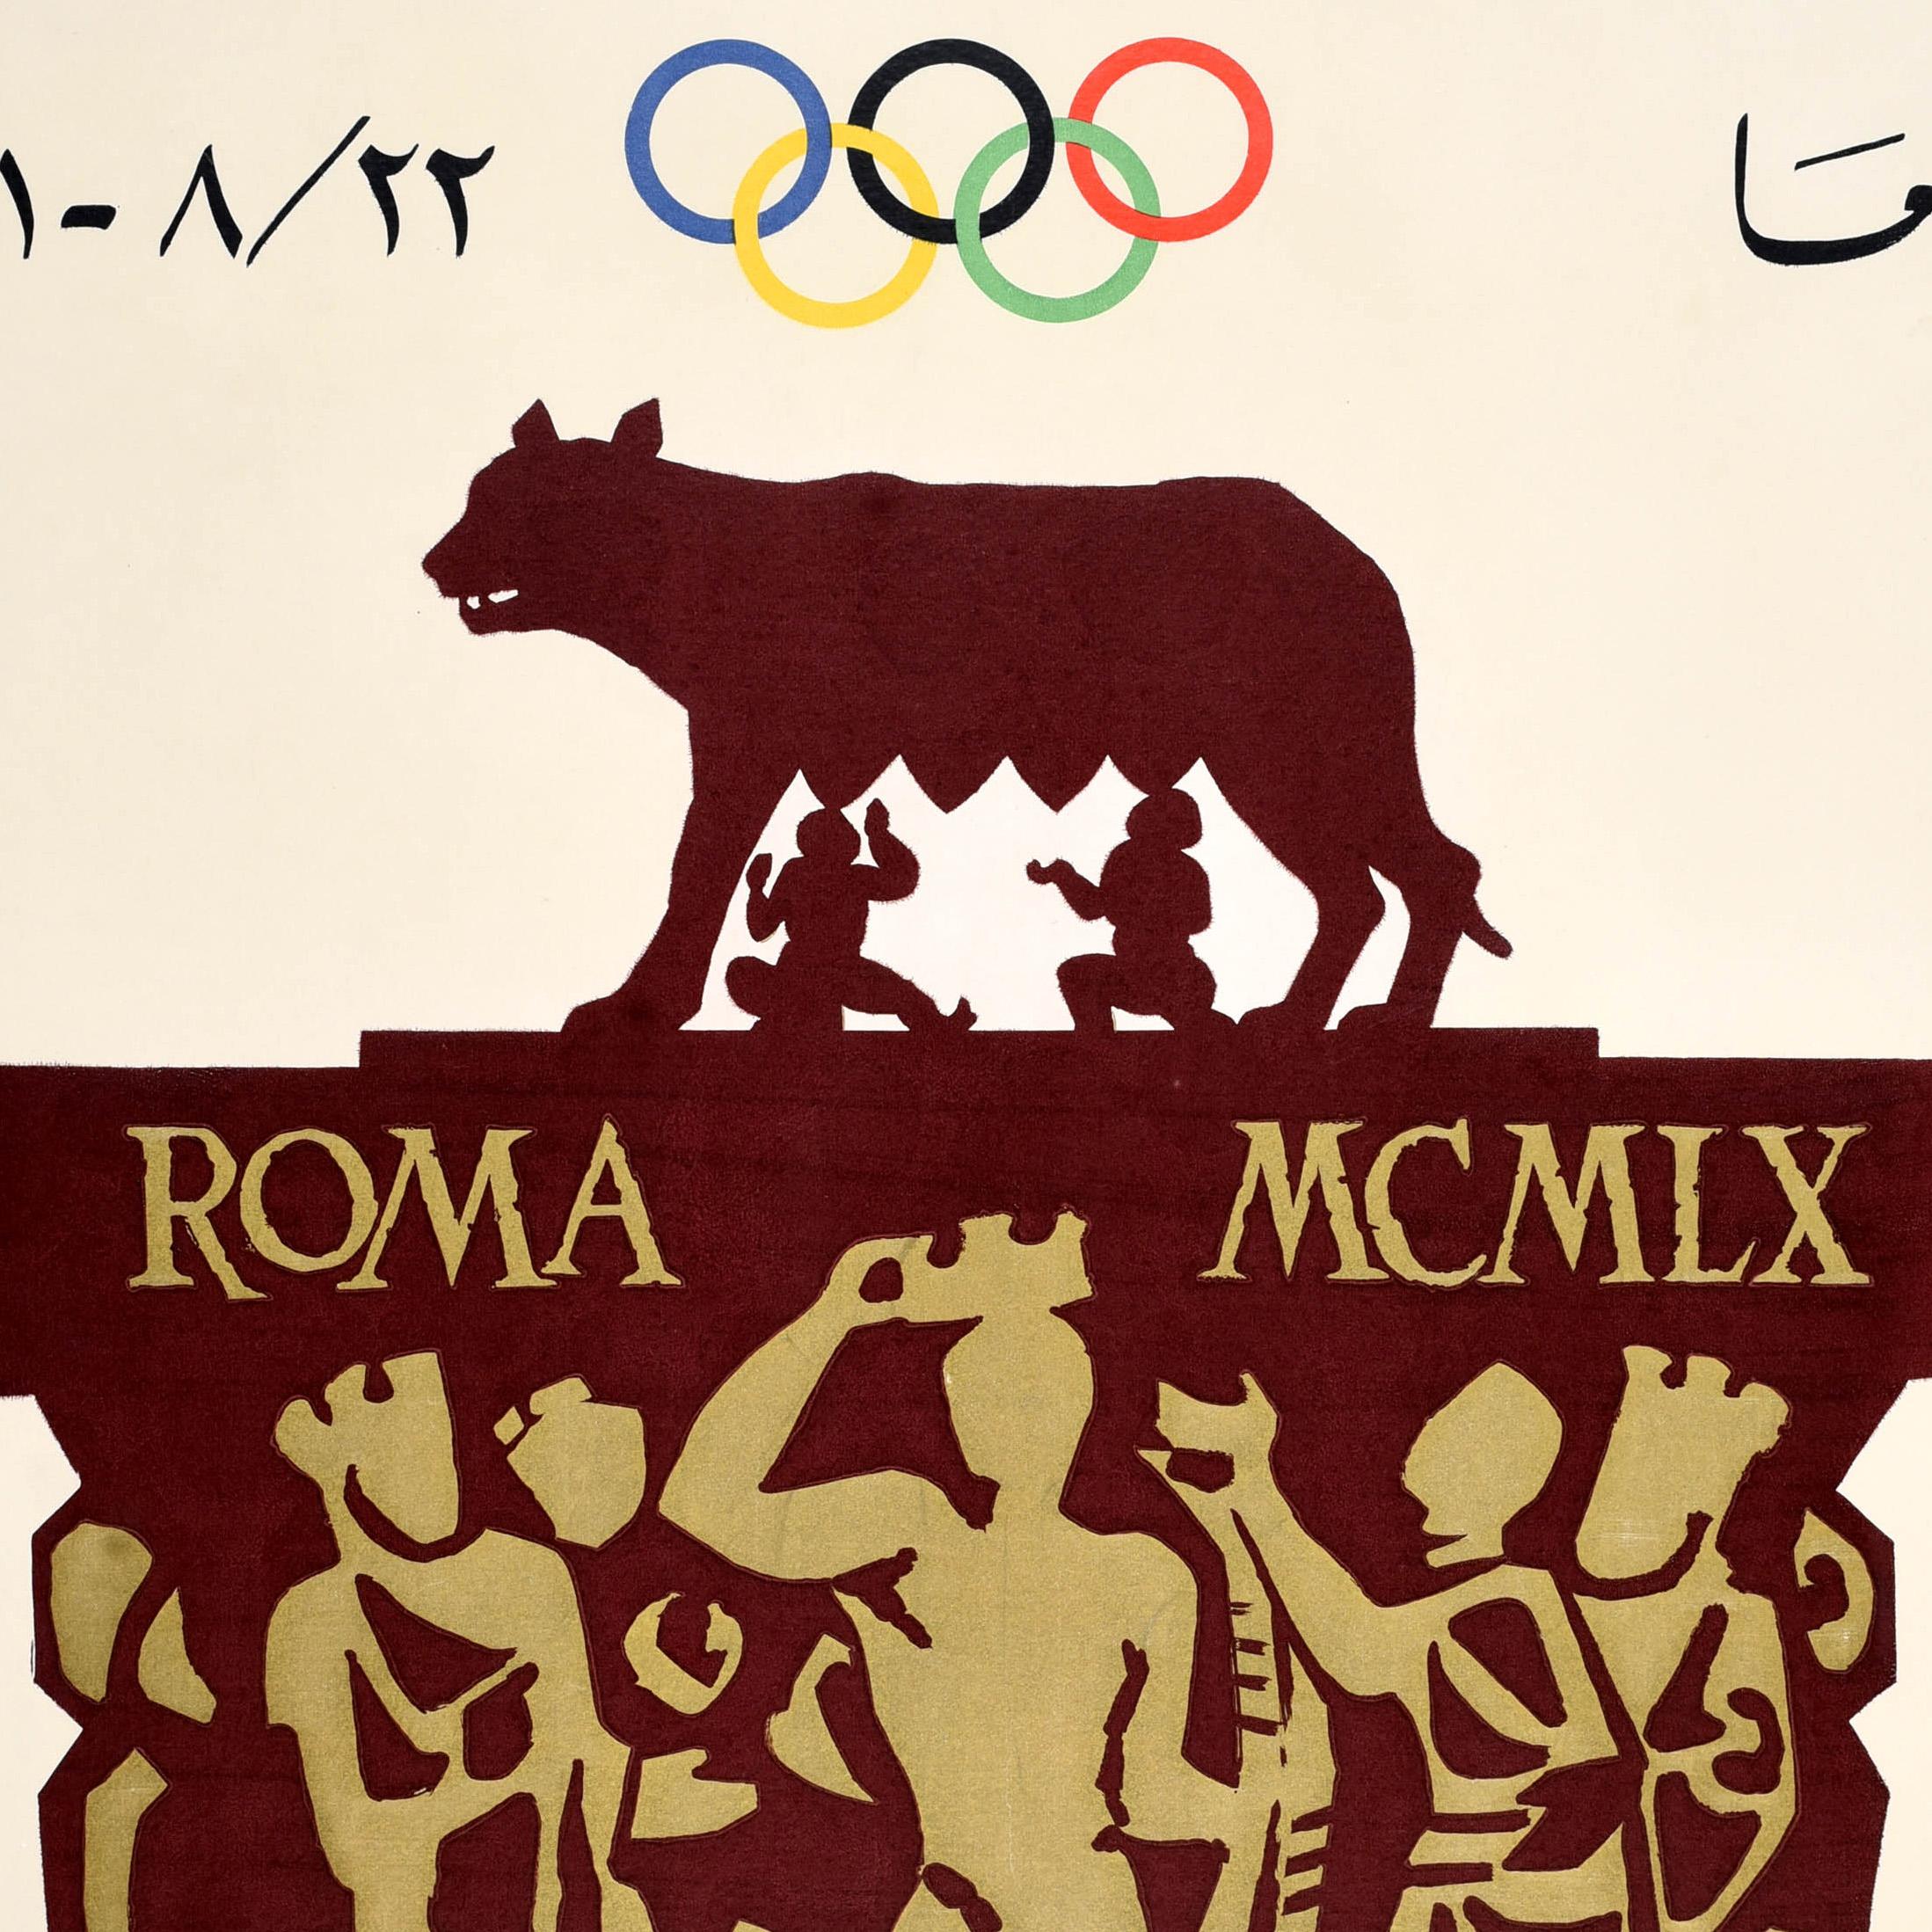 Rare original vintage sport poster for XVII Olympic Games in Rome featuring a great design by Armando Testa (1917-1992) depicting the twin brothers Romulus and Remus being suckled by the Capitoline Wolf (the ancient story from Roman mythology that